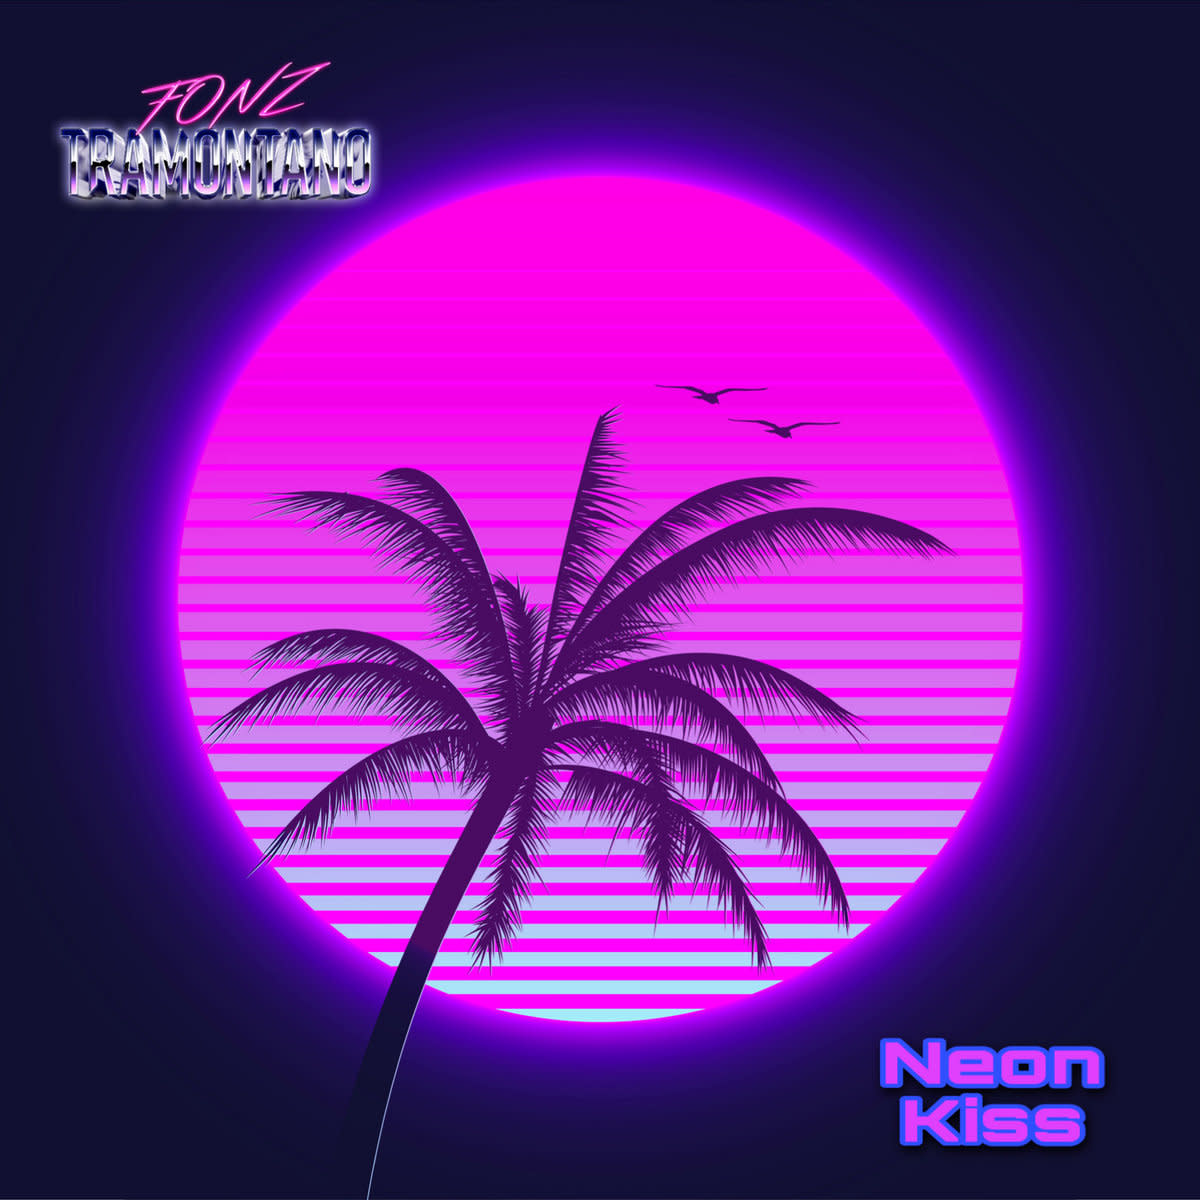 synth-single-review-neon-kiss-by-fonz-tramontano